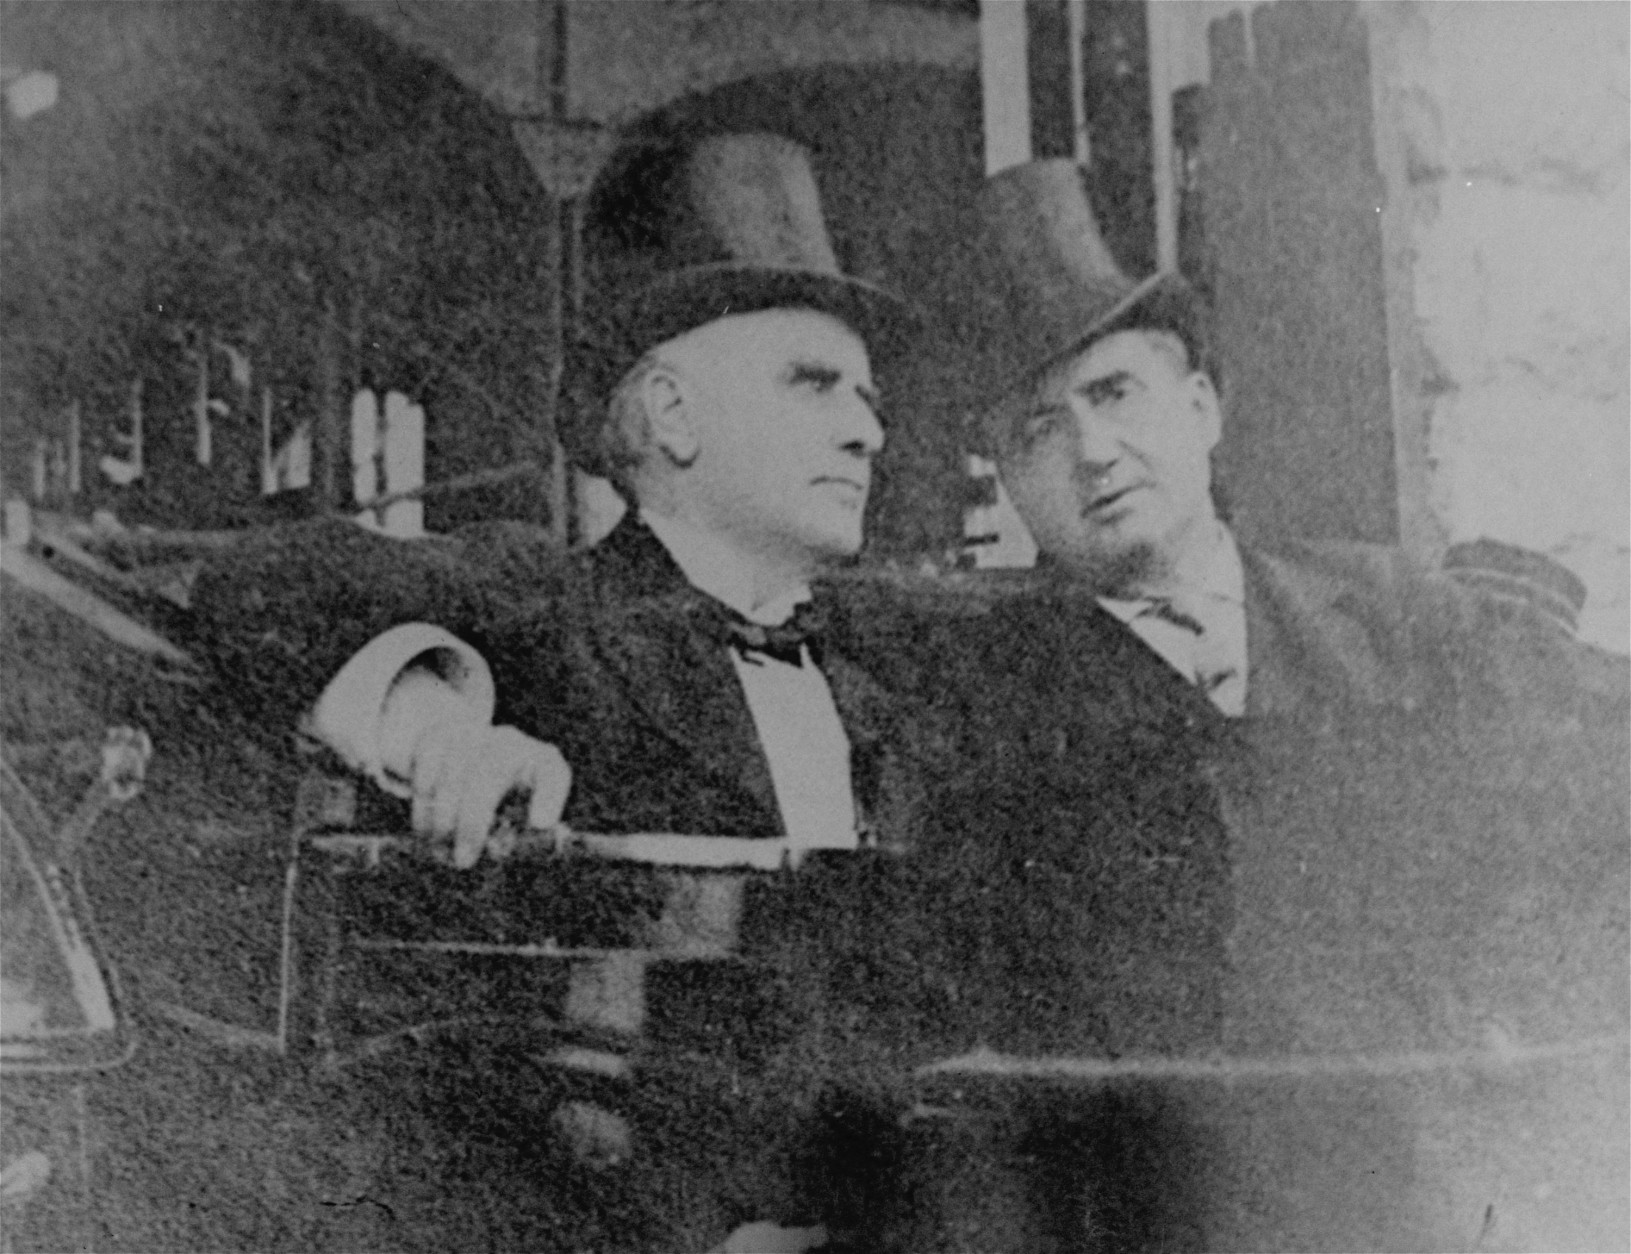 This is one of the last photos taken of U.S. President William McKinley on the day he was shot, September 6, 1901.  It shows him, left, with John G. Milburn, right, President of the Pan American Exposition, leaving Niagara Falls, N.Y., to return to Buffalo and the reception at which he was shot. (AP Photo)